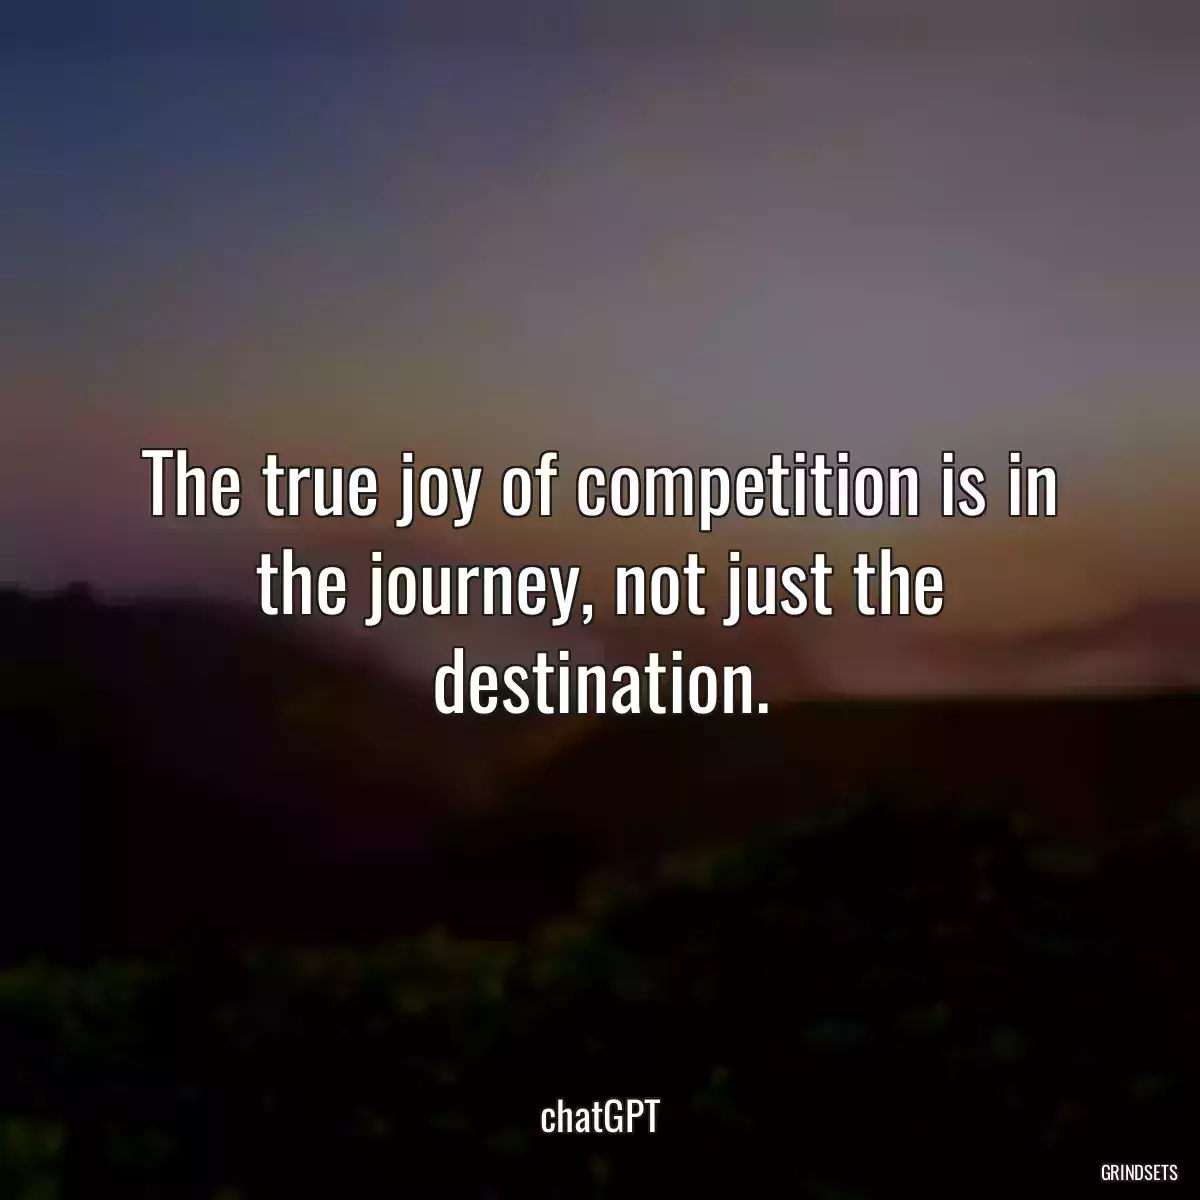 The true joy of competition is in the journey, not just the destination.